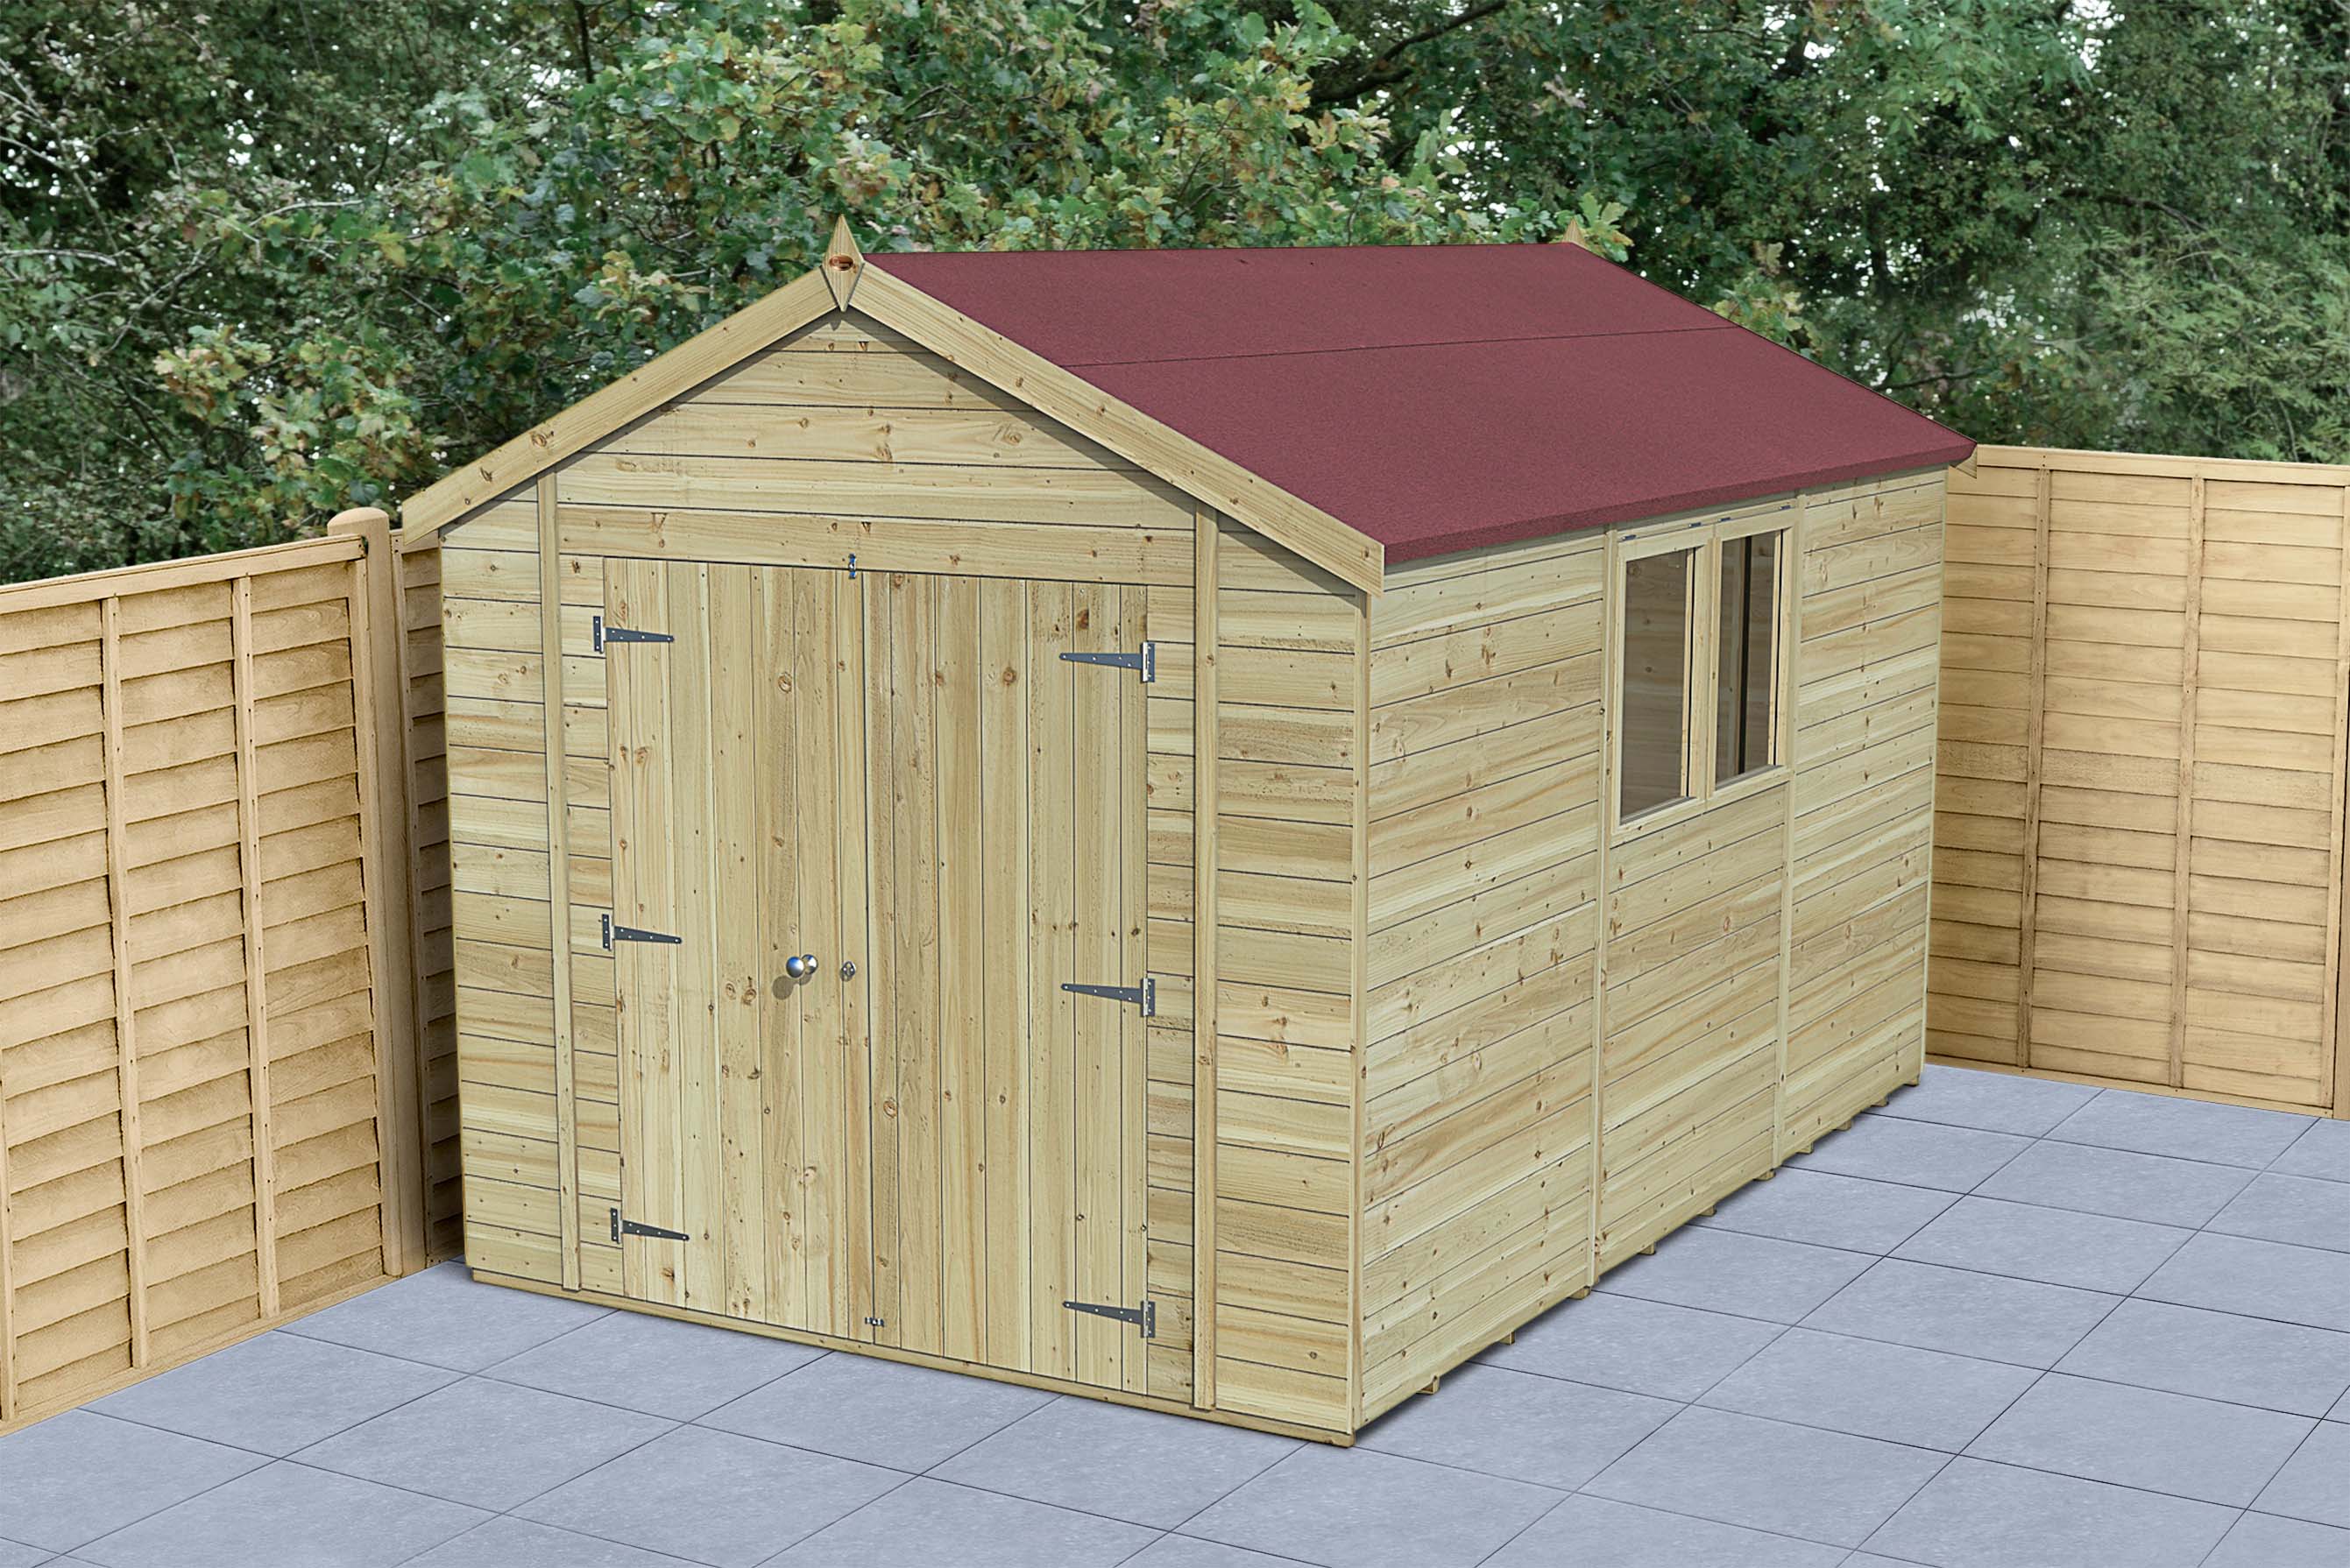 Forest Garden Timberdale 12 x 8ft Apex Double Door Shed with Base